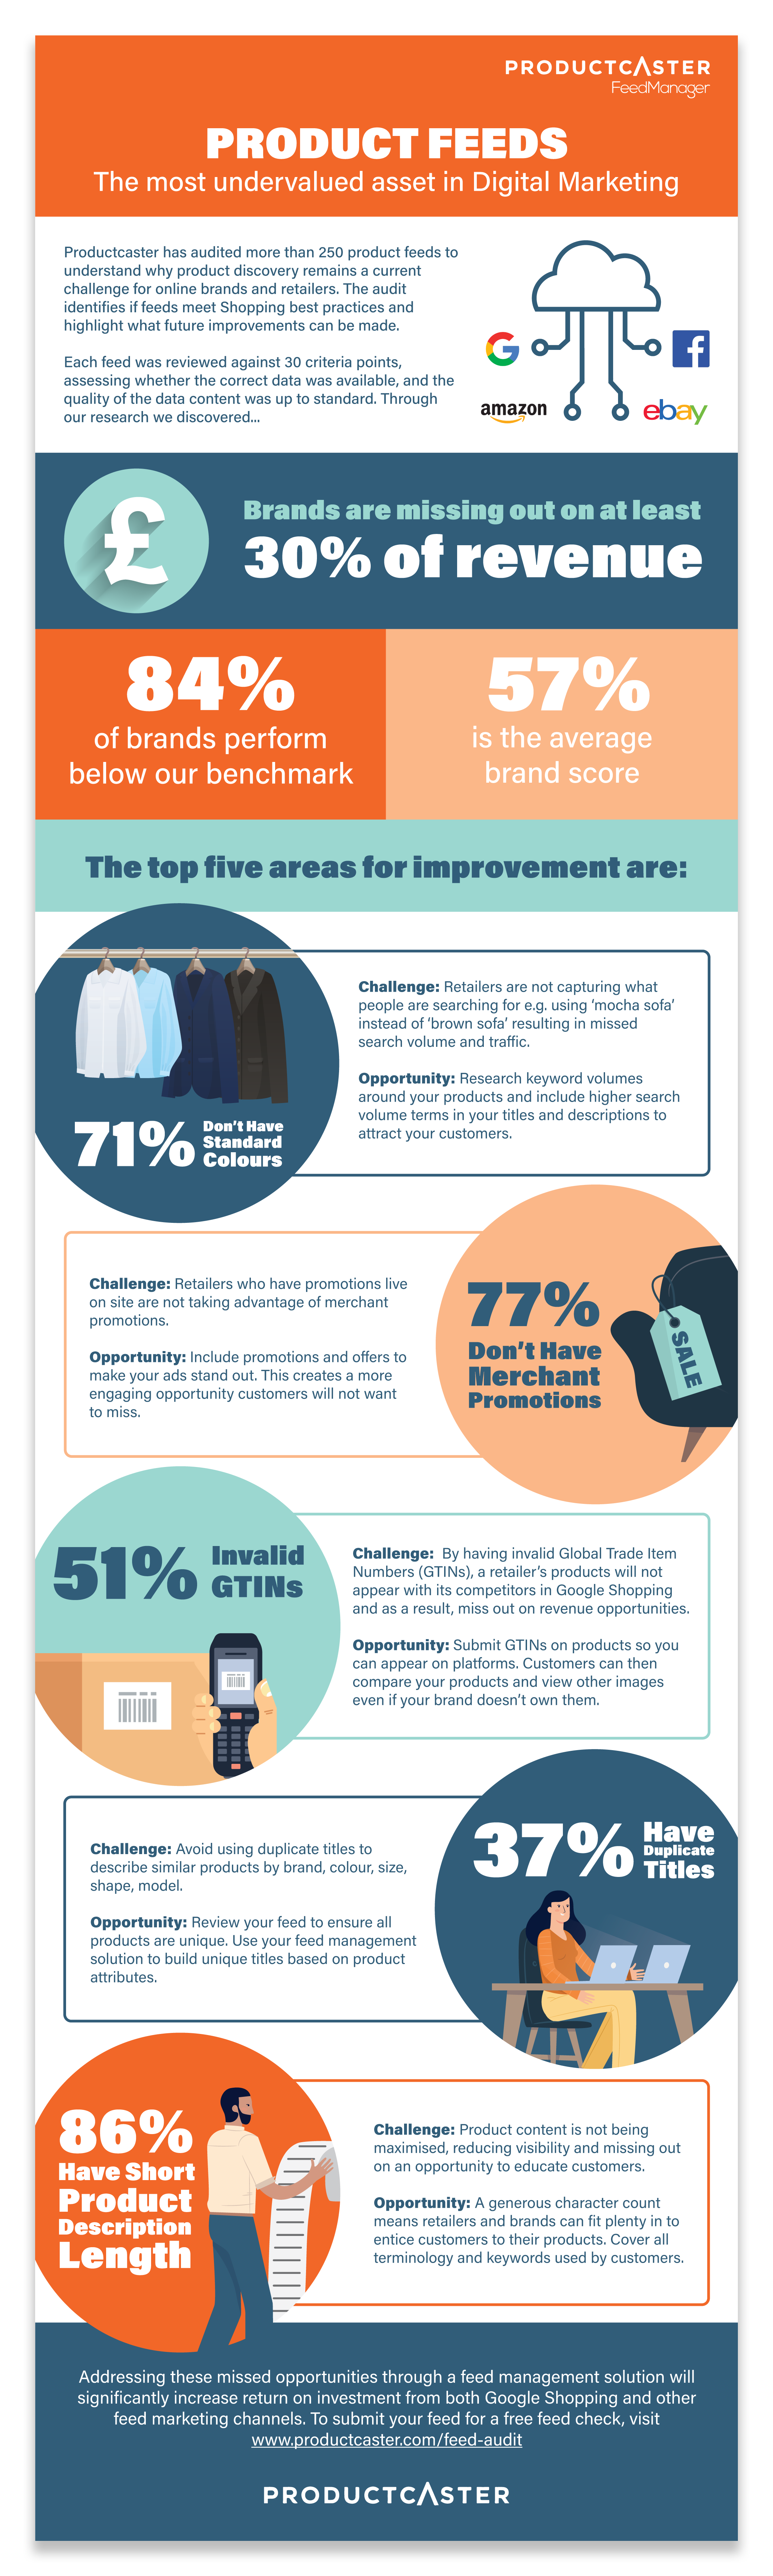 Productcaster FeedManager Infographic